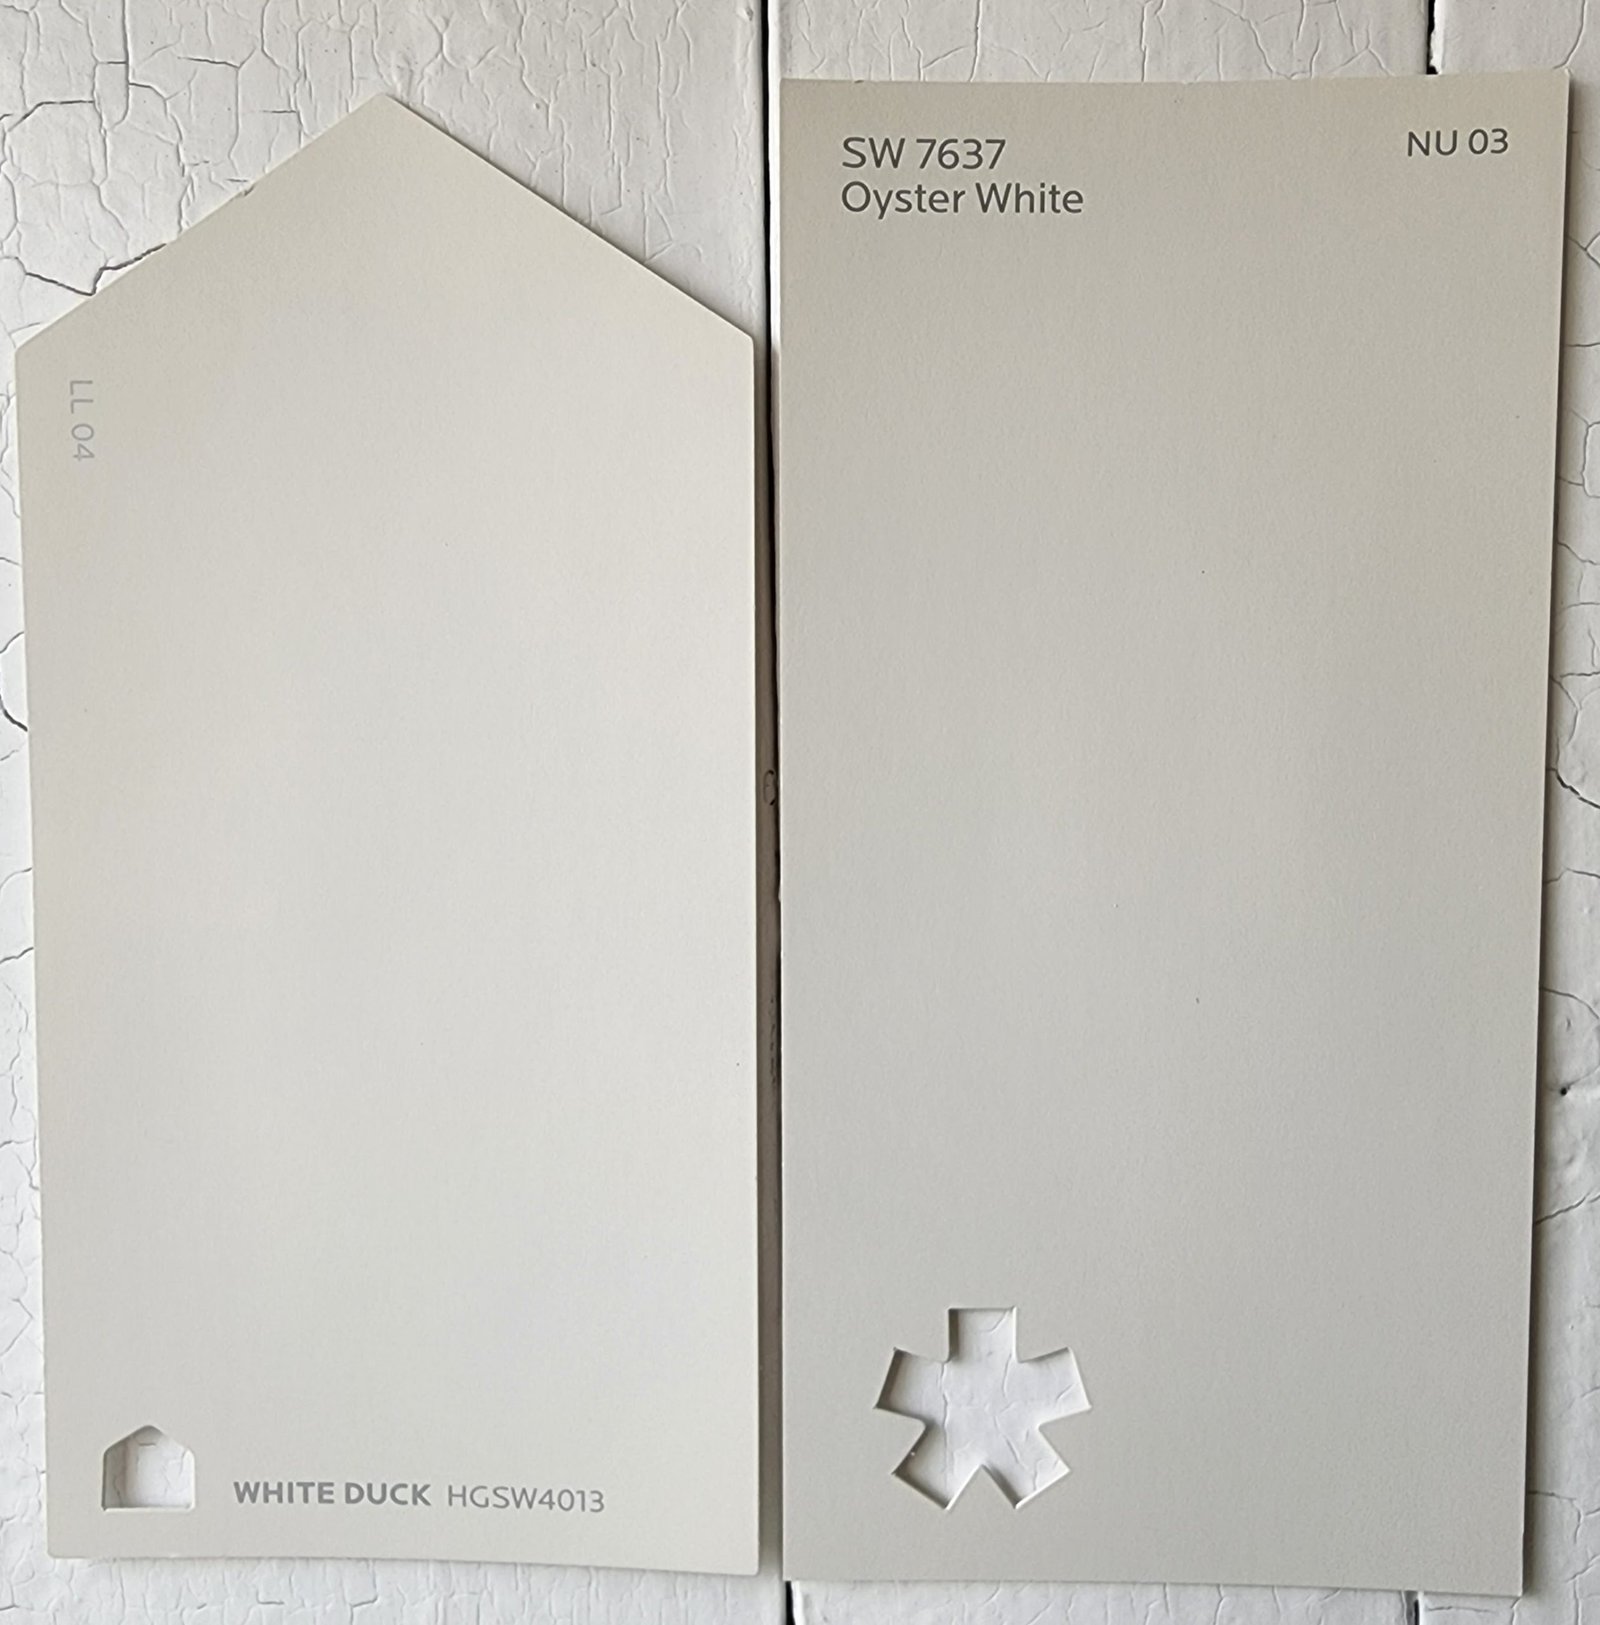  White Duck vs Oyster White by Sherwin Williams scaled